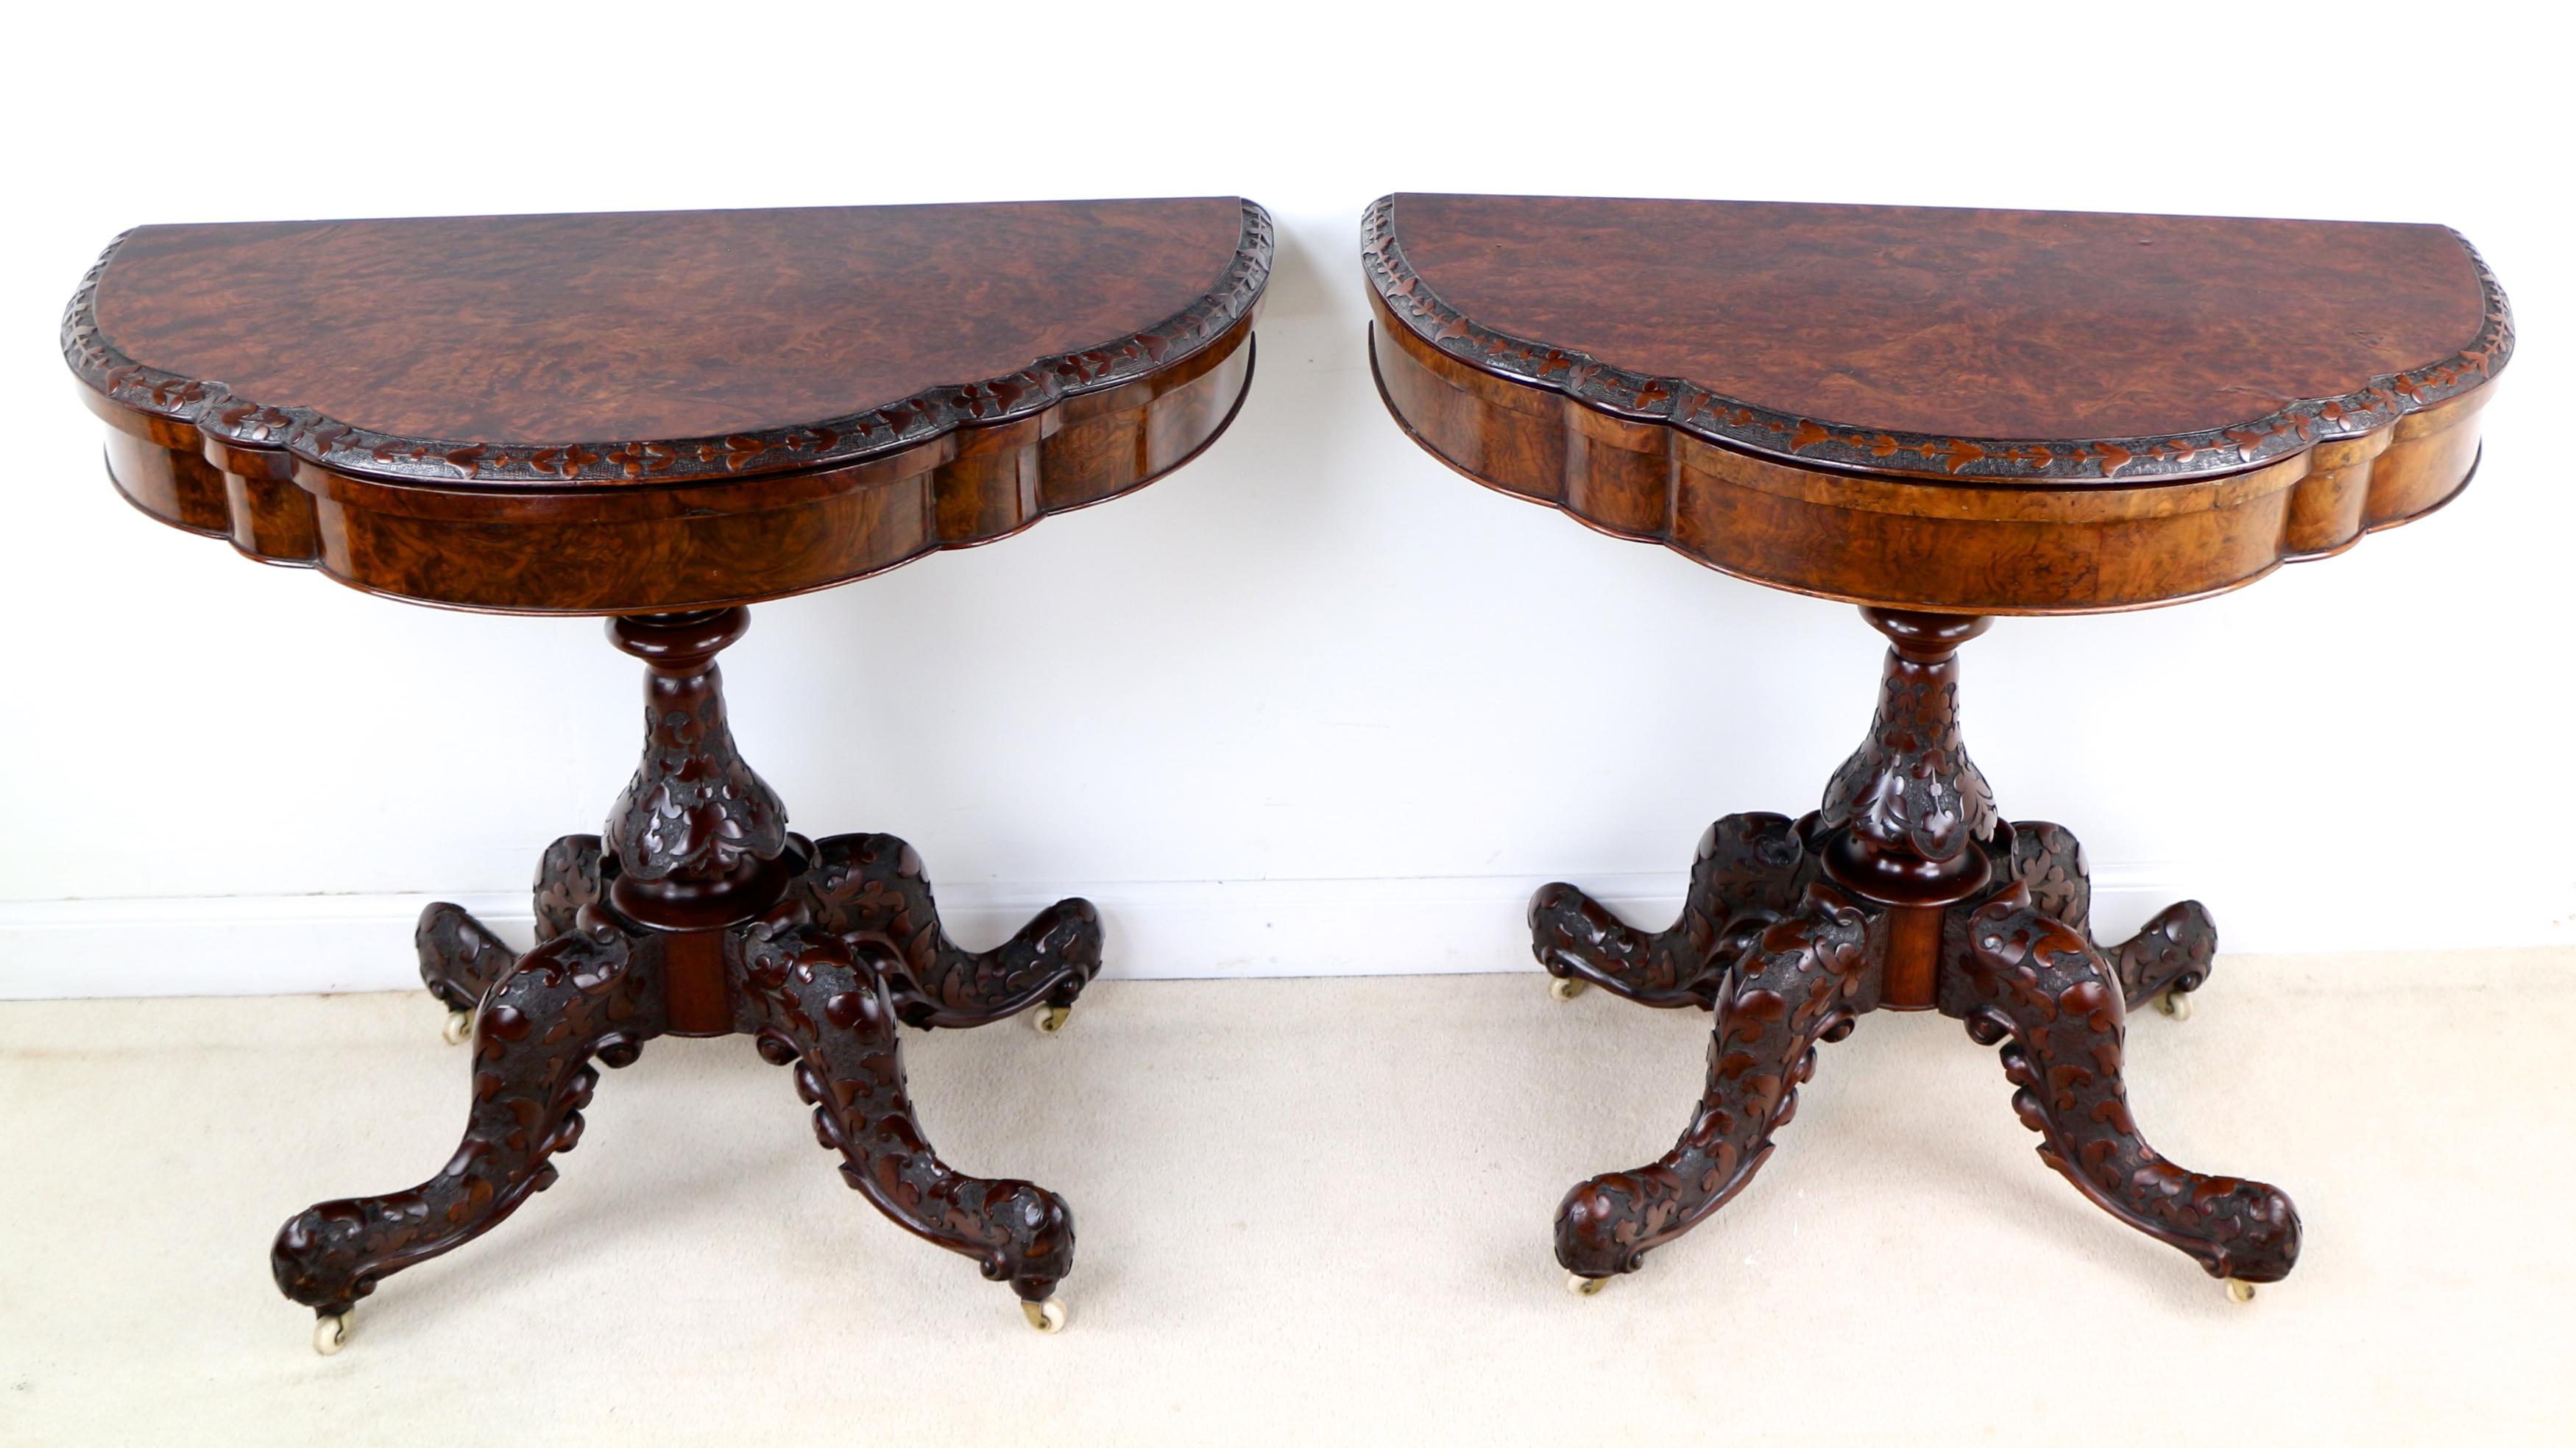 Stunning pair of 19th century Irish burr walnut cards tables, the serpentine shaped tops with highly figured bookmatched veneers and ‘Irish carved’ edge of trailing Shamrocks, leaves and bell flowers. Each standing on a turned and similarly